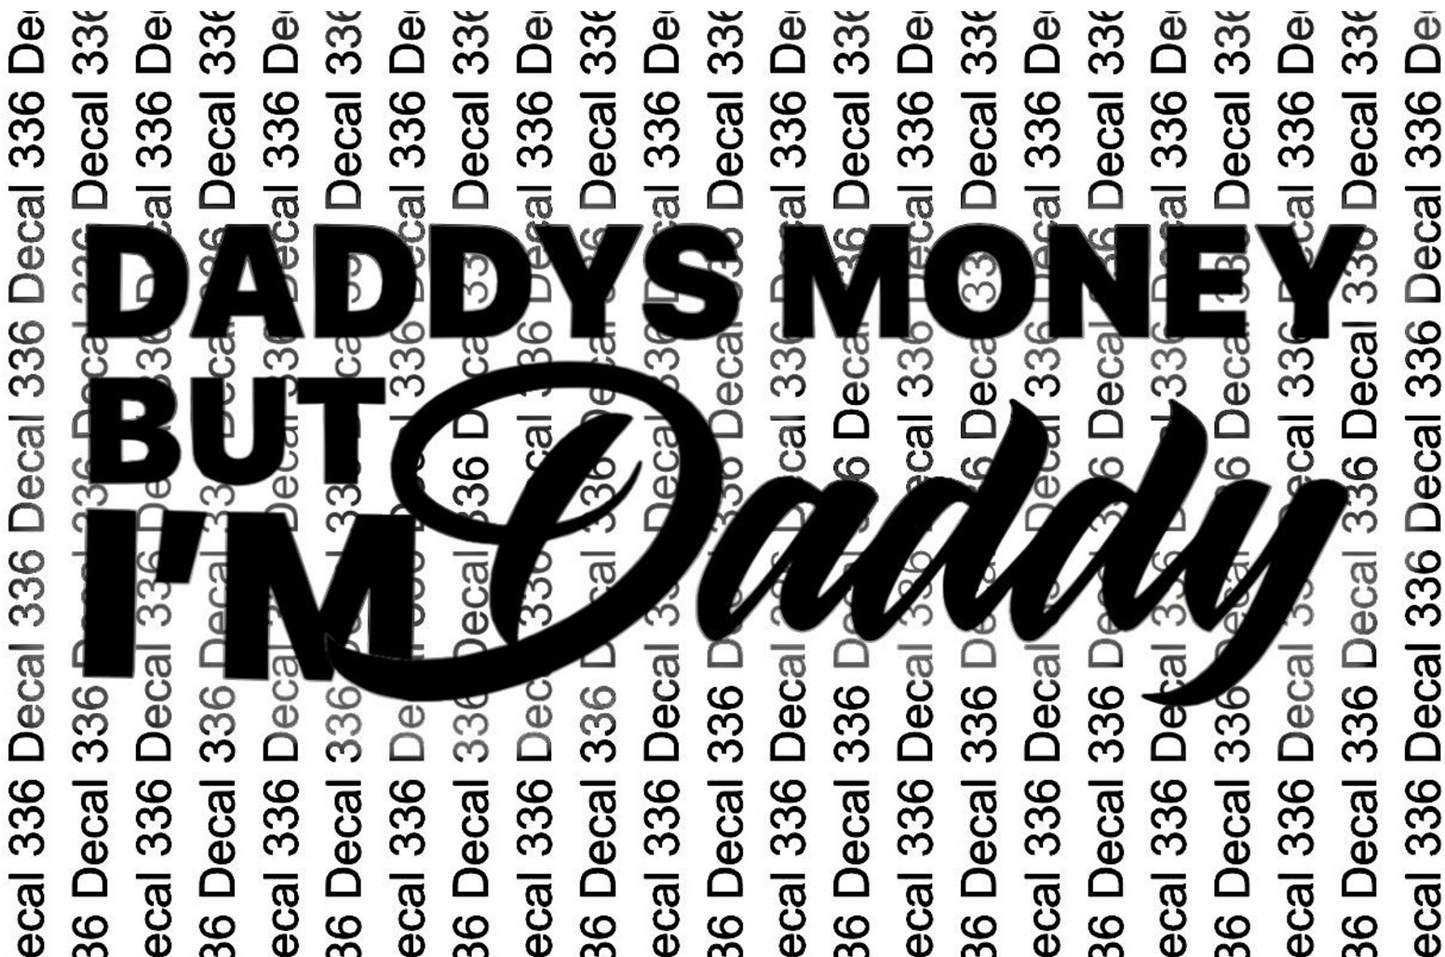 Daddy’s Money But I’m Daddy